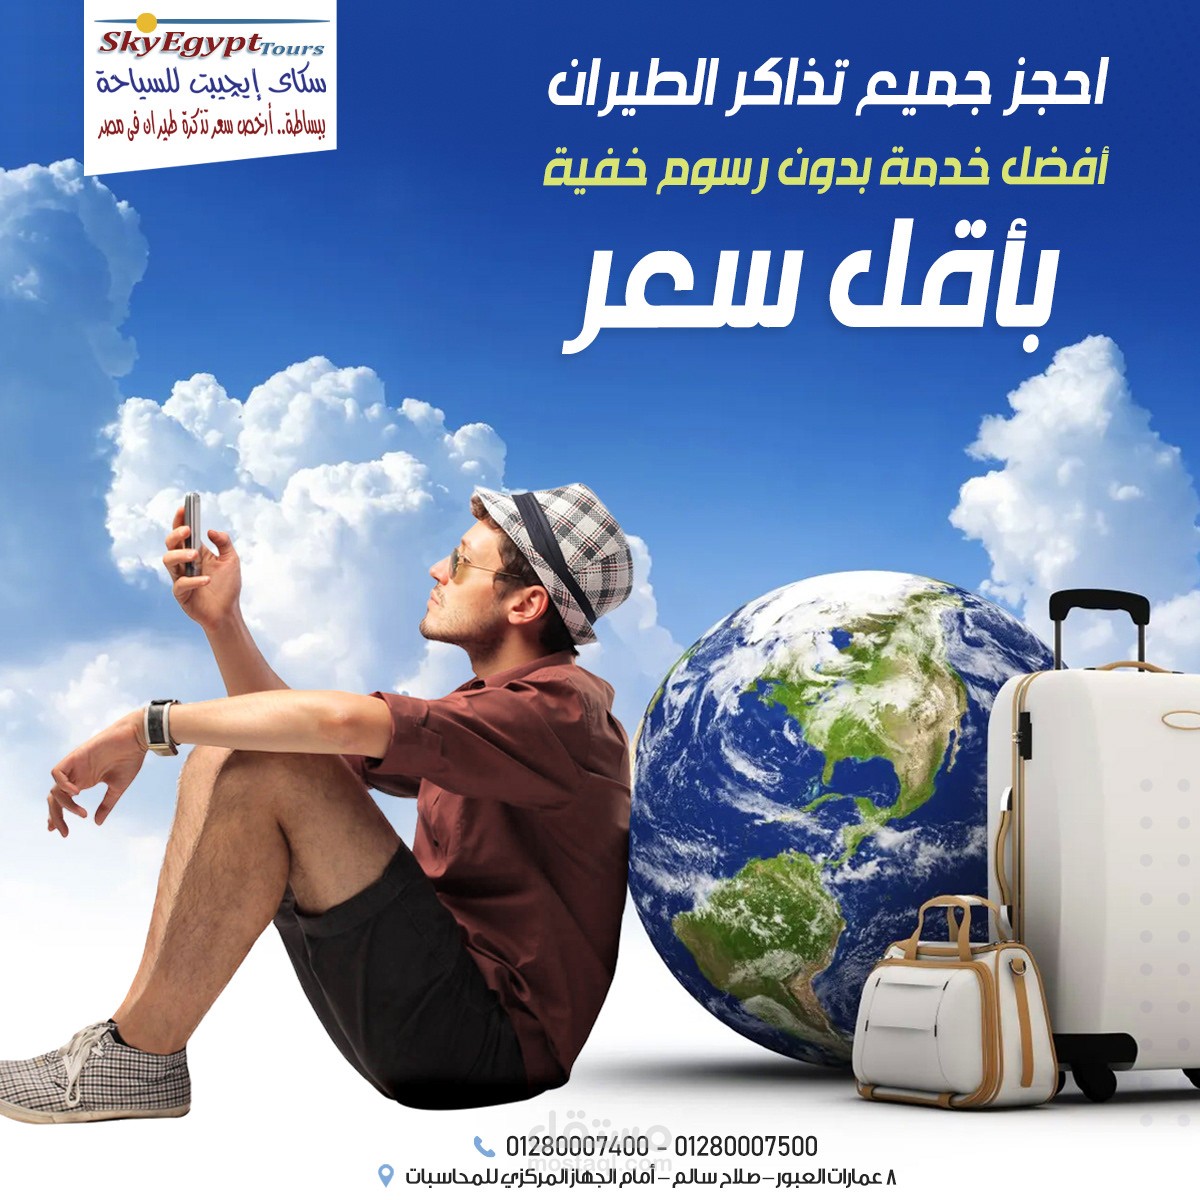 sky egypt tours phone number